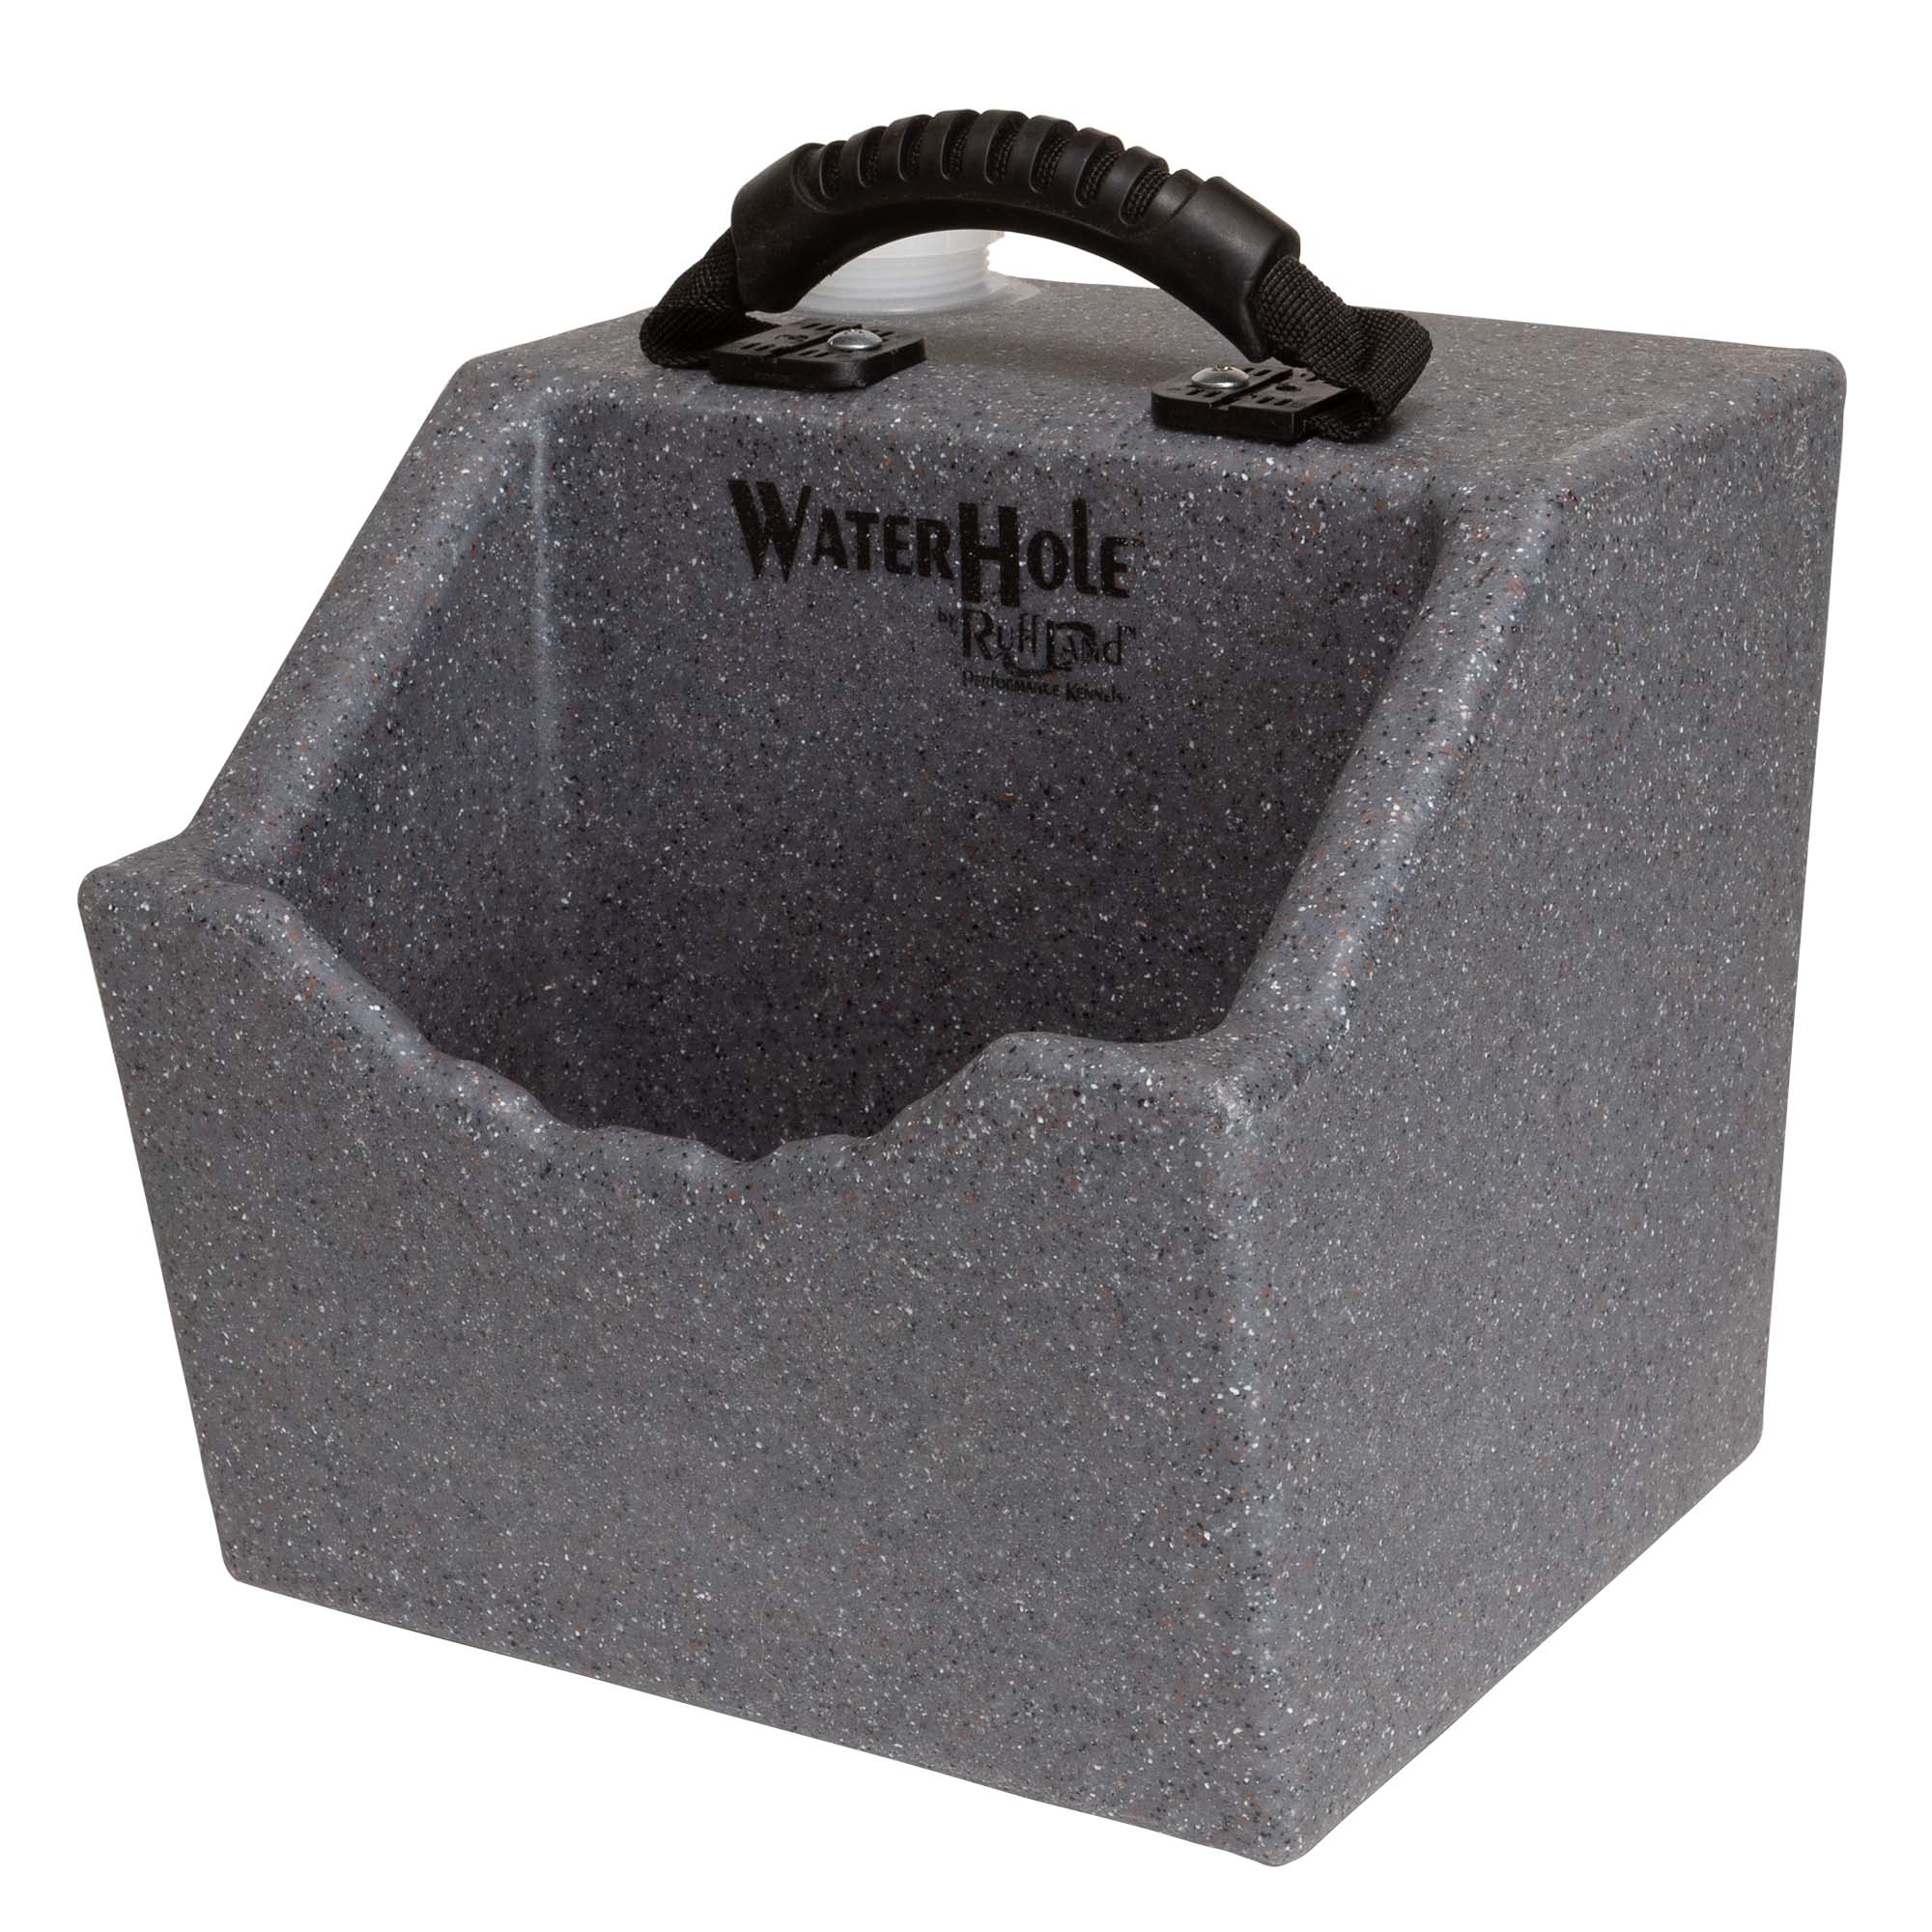 Ruff Land Kennels Water Hole (Water bowl for dogs)